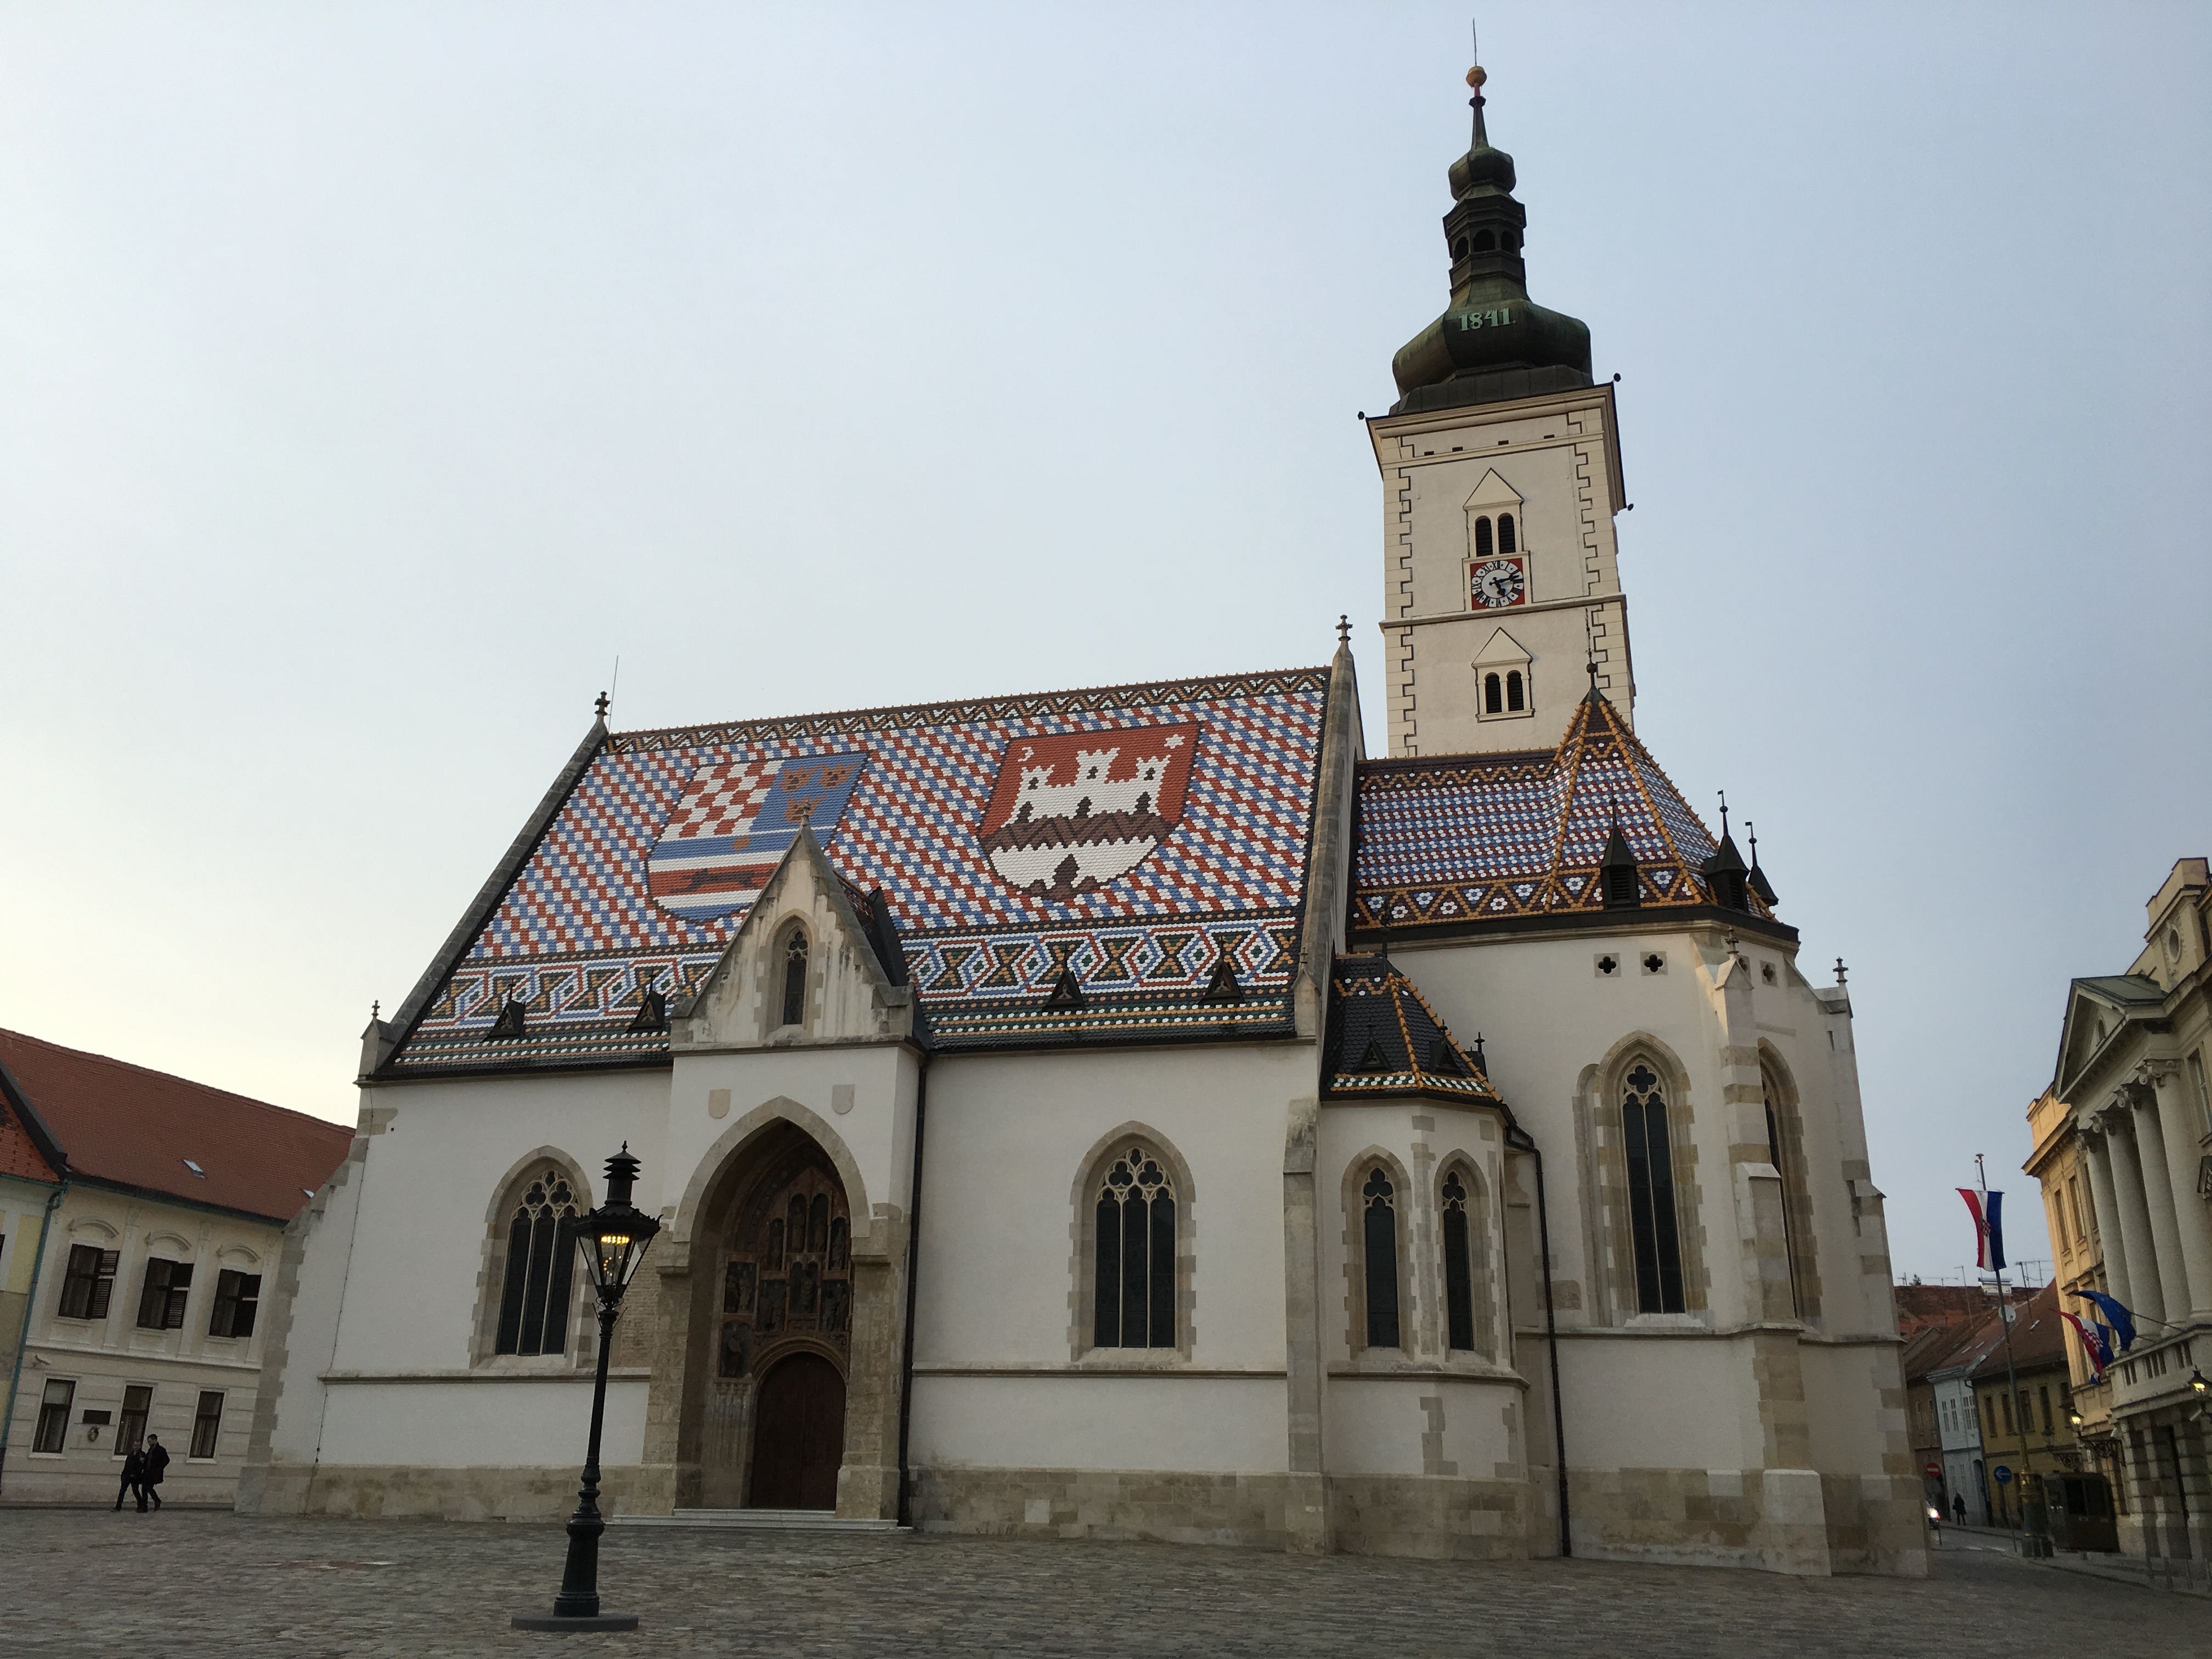 St. Mark’s church in the heart of the Upper Town (“Gornij grad”) in one of Zagreb’s oldest part